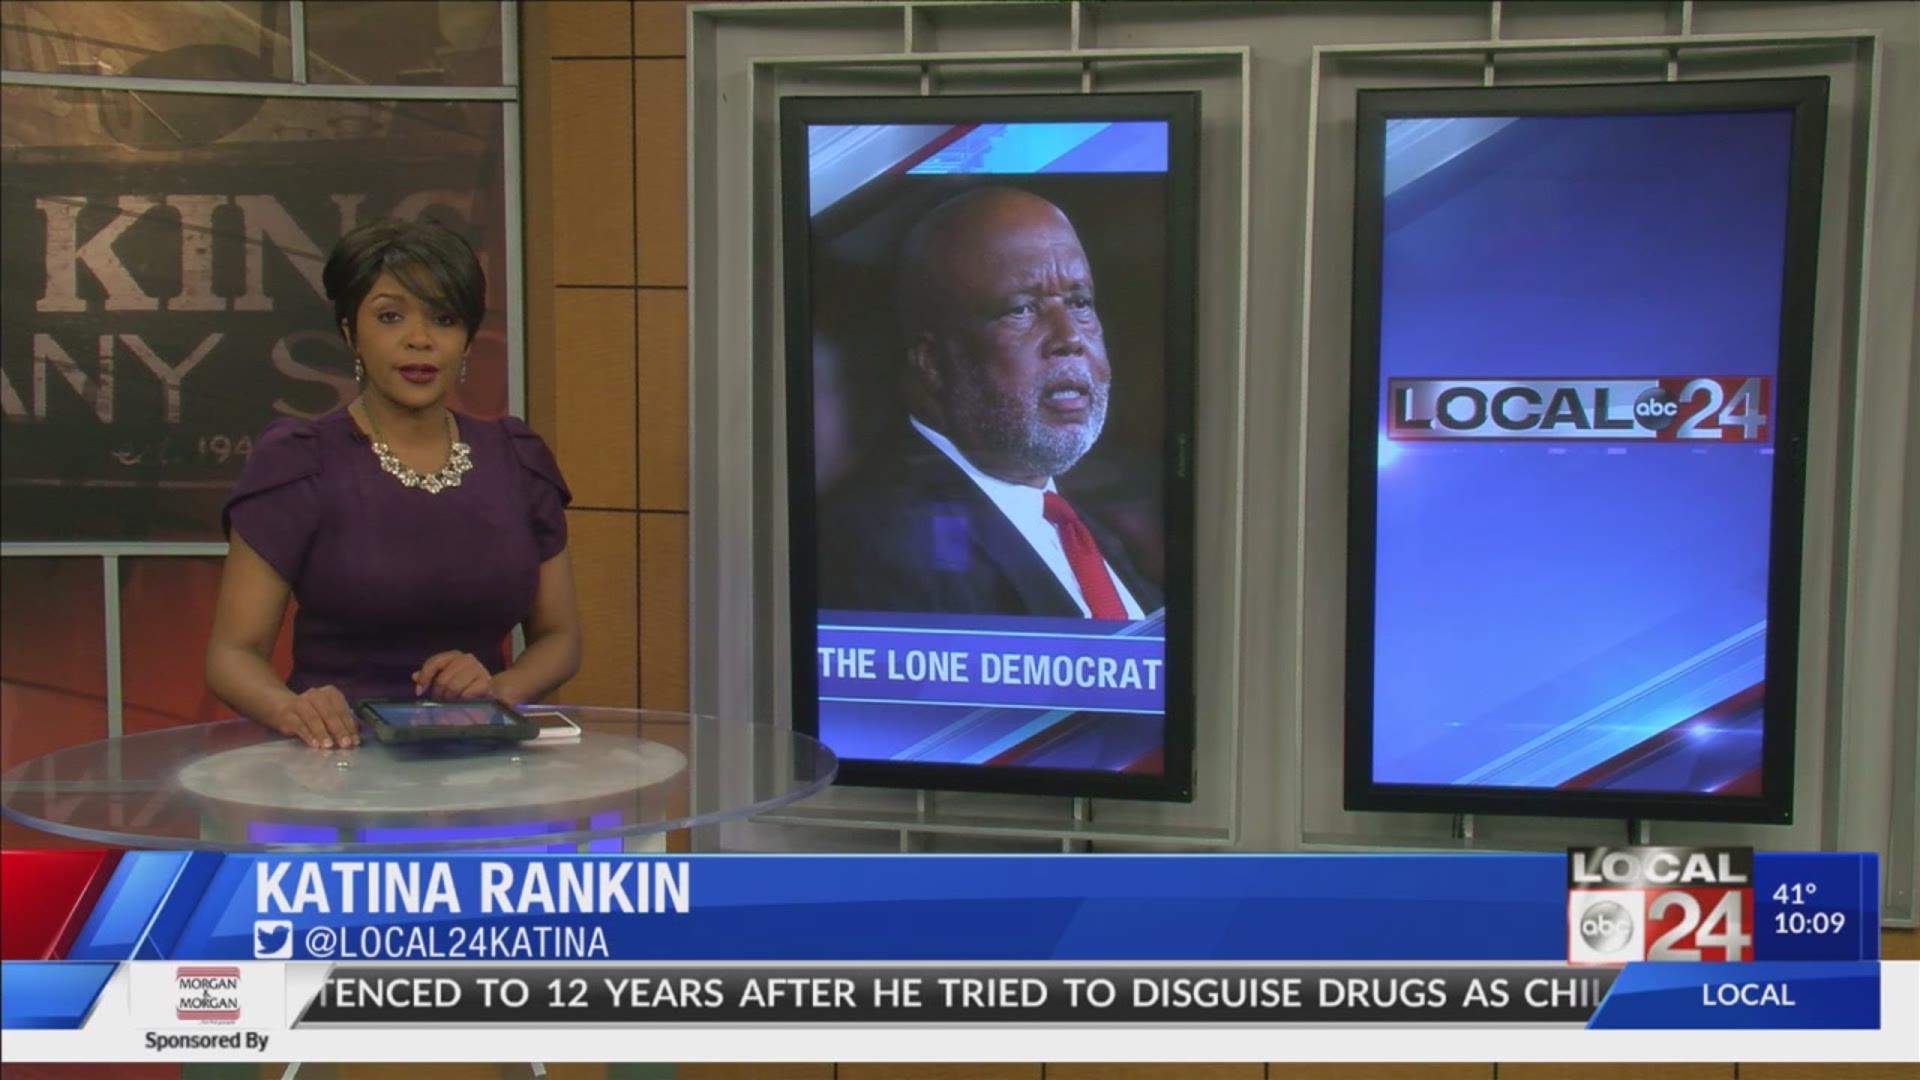 Local 24 News Weekday Anchor Katina Rankin sat down for an exclusive interview with U.S. Rep. Bennie Thompson of Mississippi.